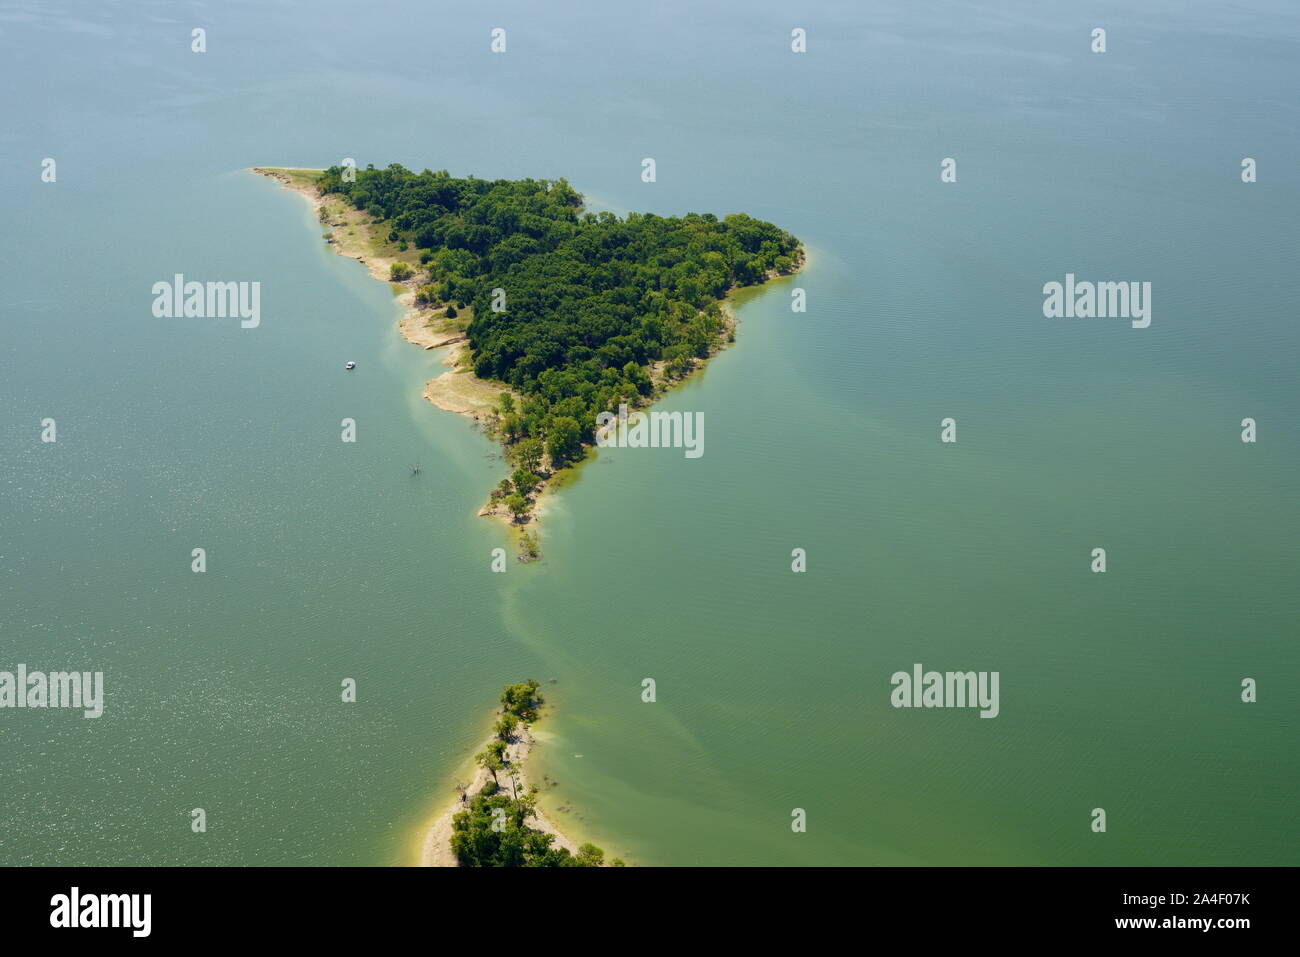 Aerial view of an island in Lavon Lake, Texas, USA. Lake Lavon is a fresh water reservoir in Collin County, part of the Dallas Metropolitan Area. Stock Photo